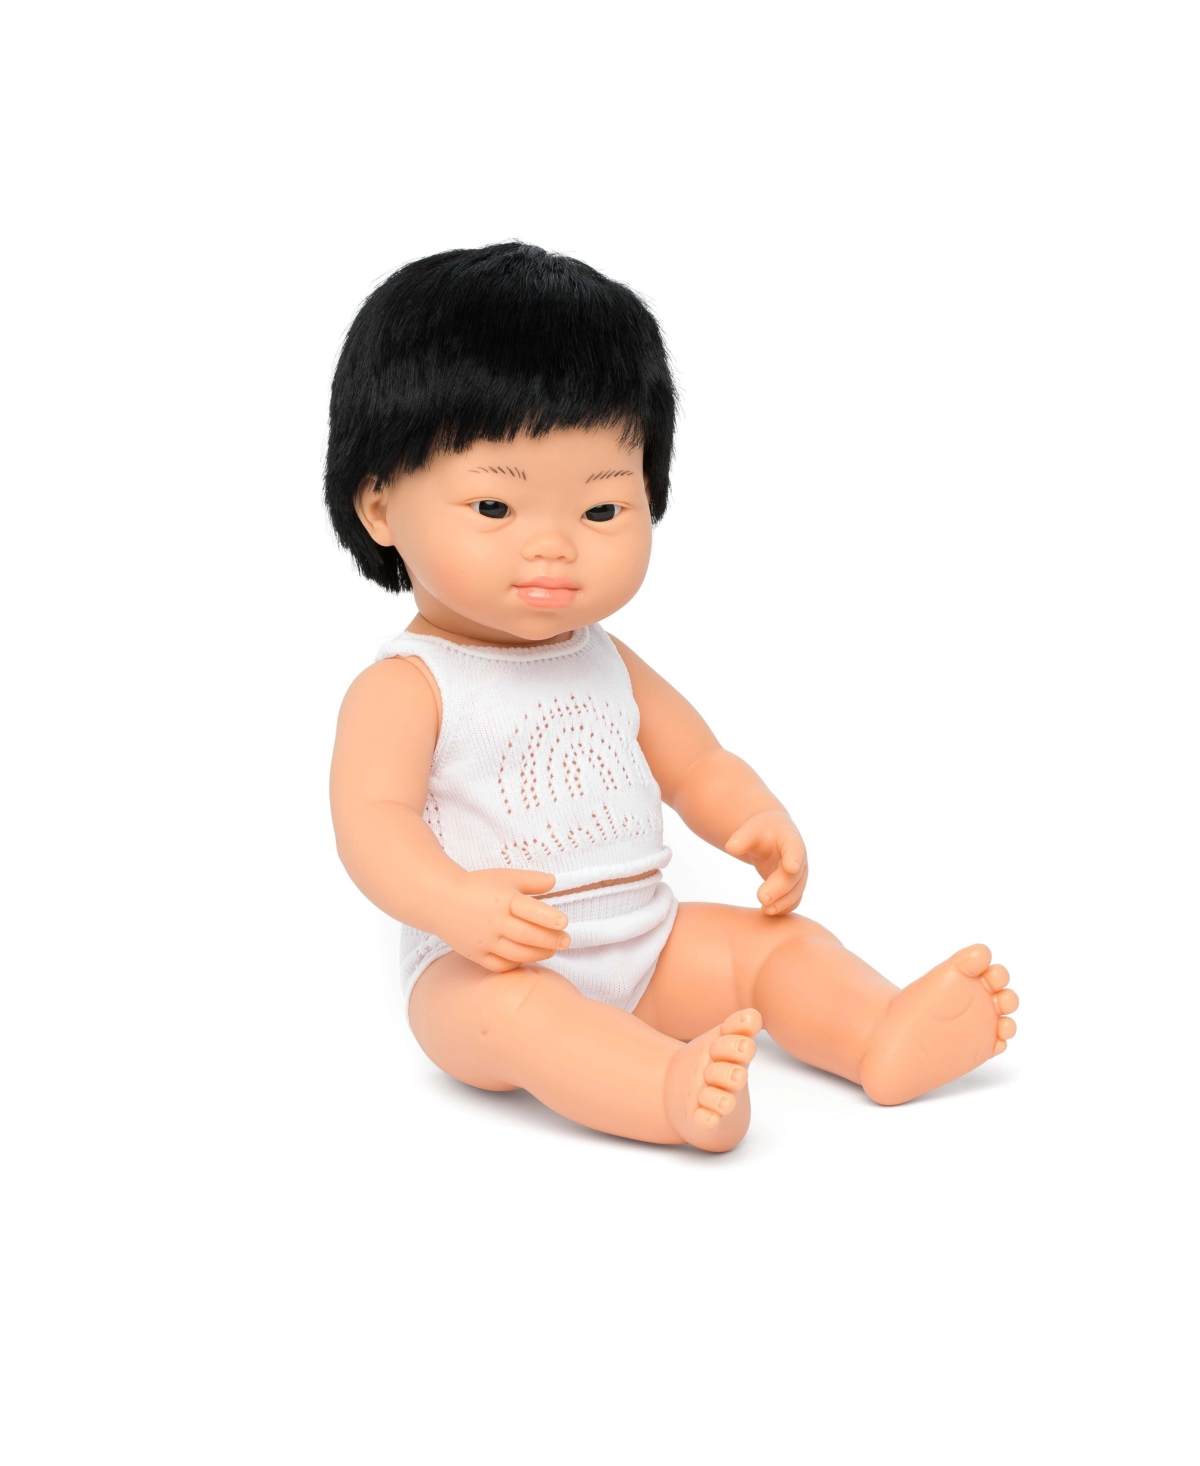 Miniland Kids' Baby Boy 15" Asian Doll With Down Syndrome In Multicolor